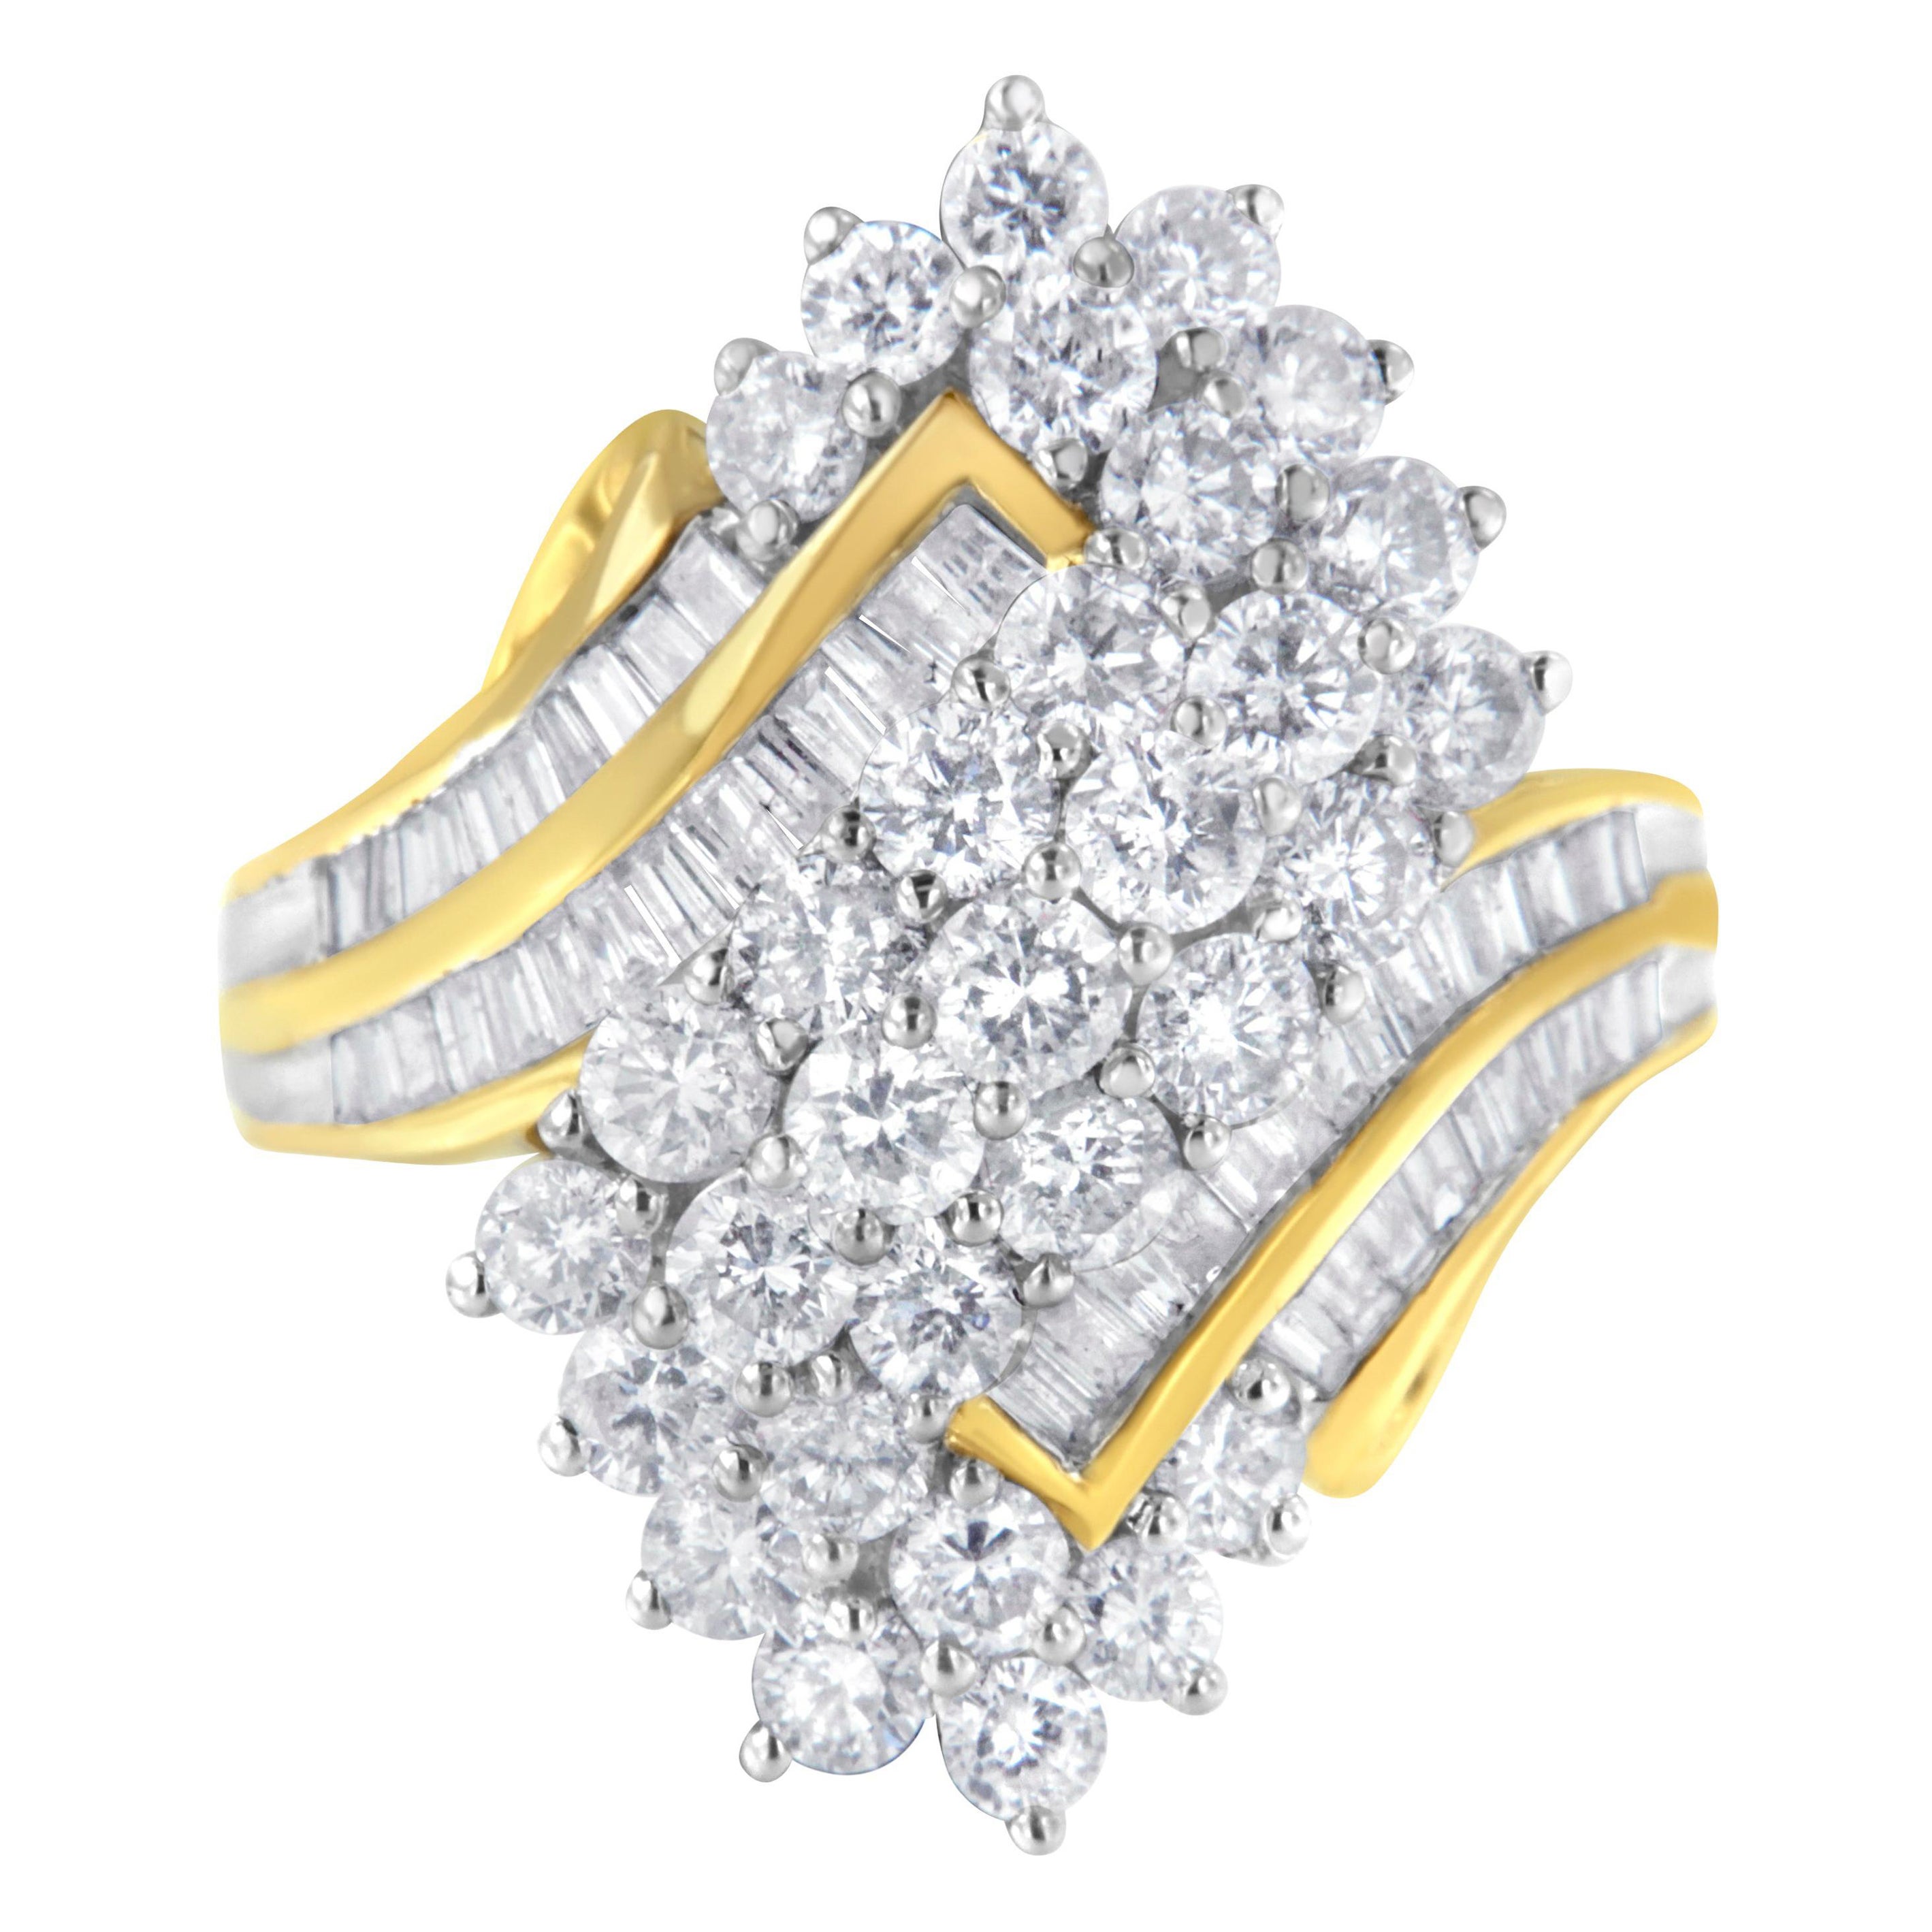 10K Yellow Gold 2 5/8 Carat Diamond Cluster Ring For Sale